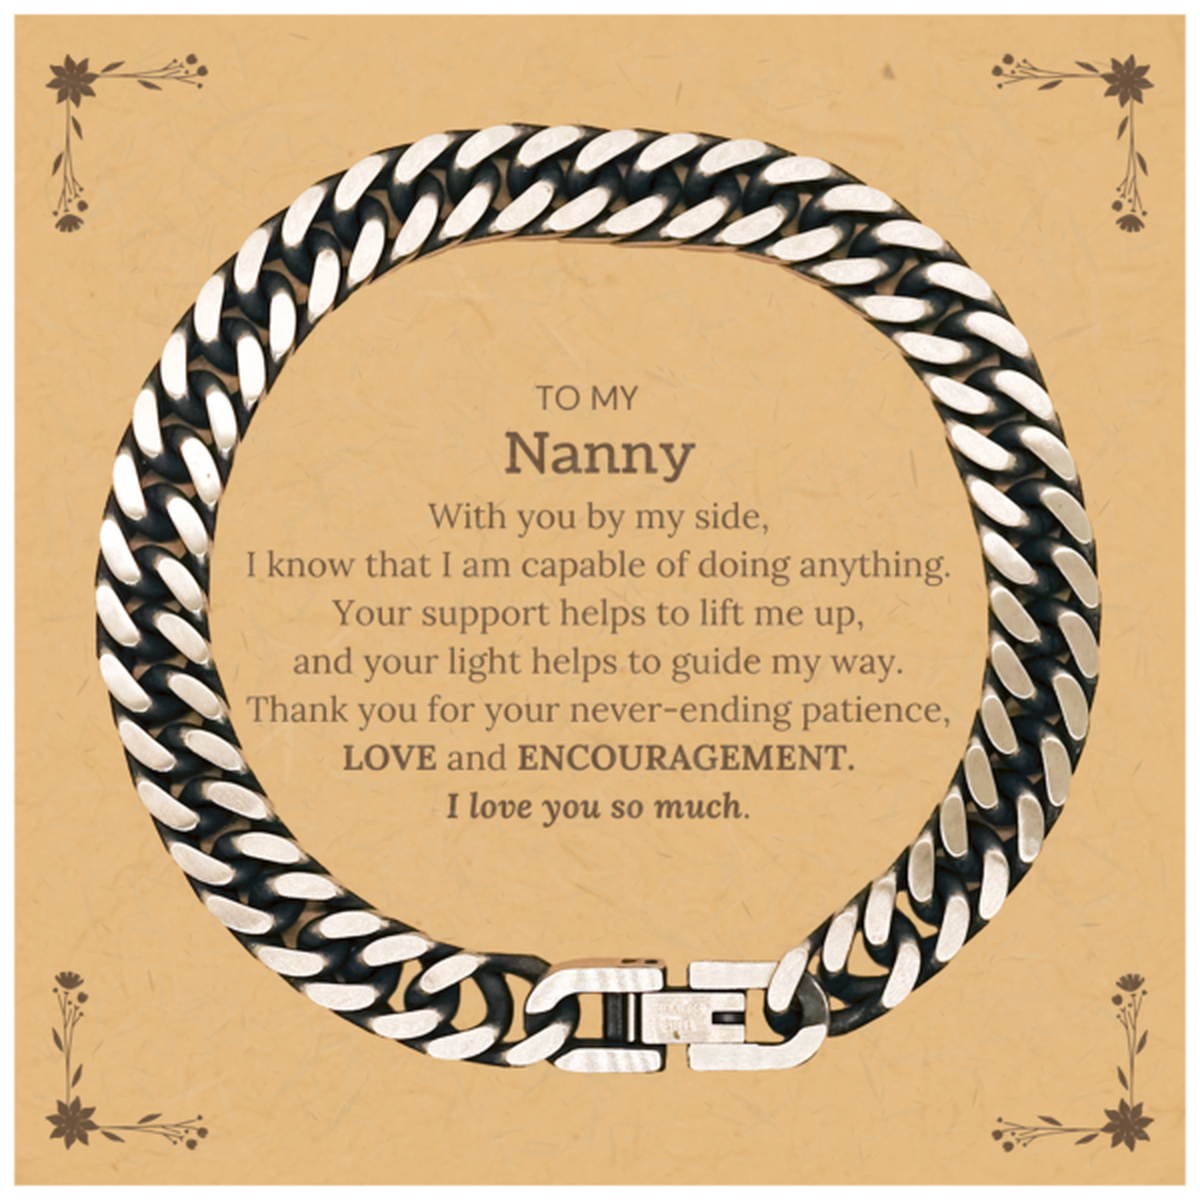 Appreciation Nanny Cuban Link Chain Bracelet Gifts, To My Nanny Birthday Christmas Wedding Keepsake Gifts for Nanny With you by my side, I know that I am capable of doing anything. I love you so much